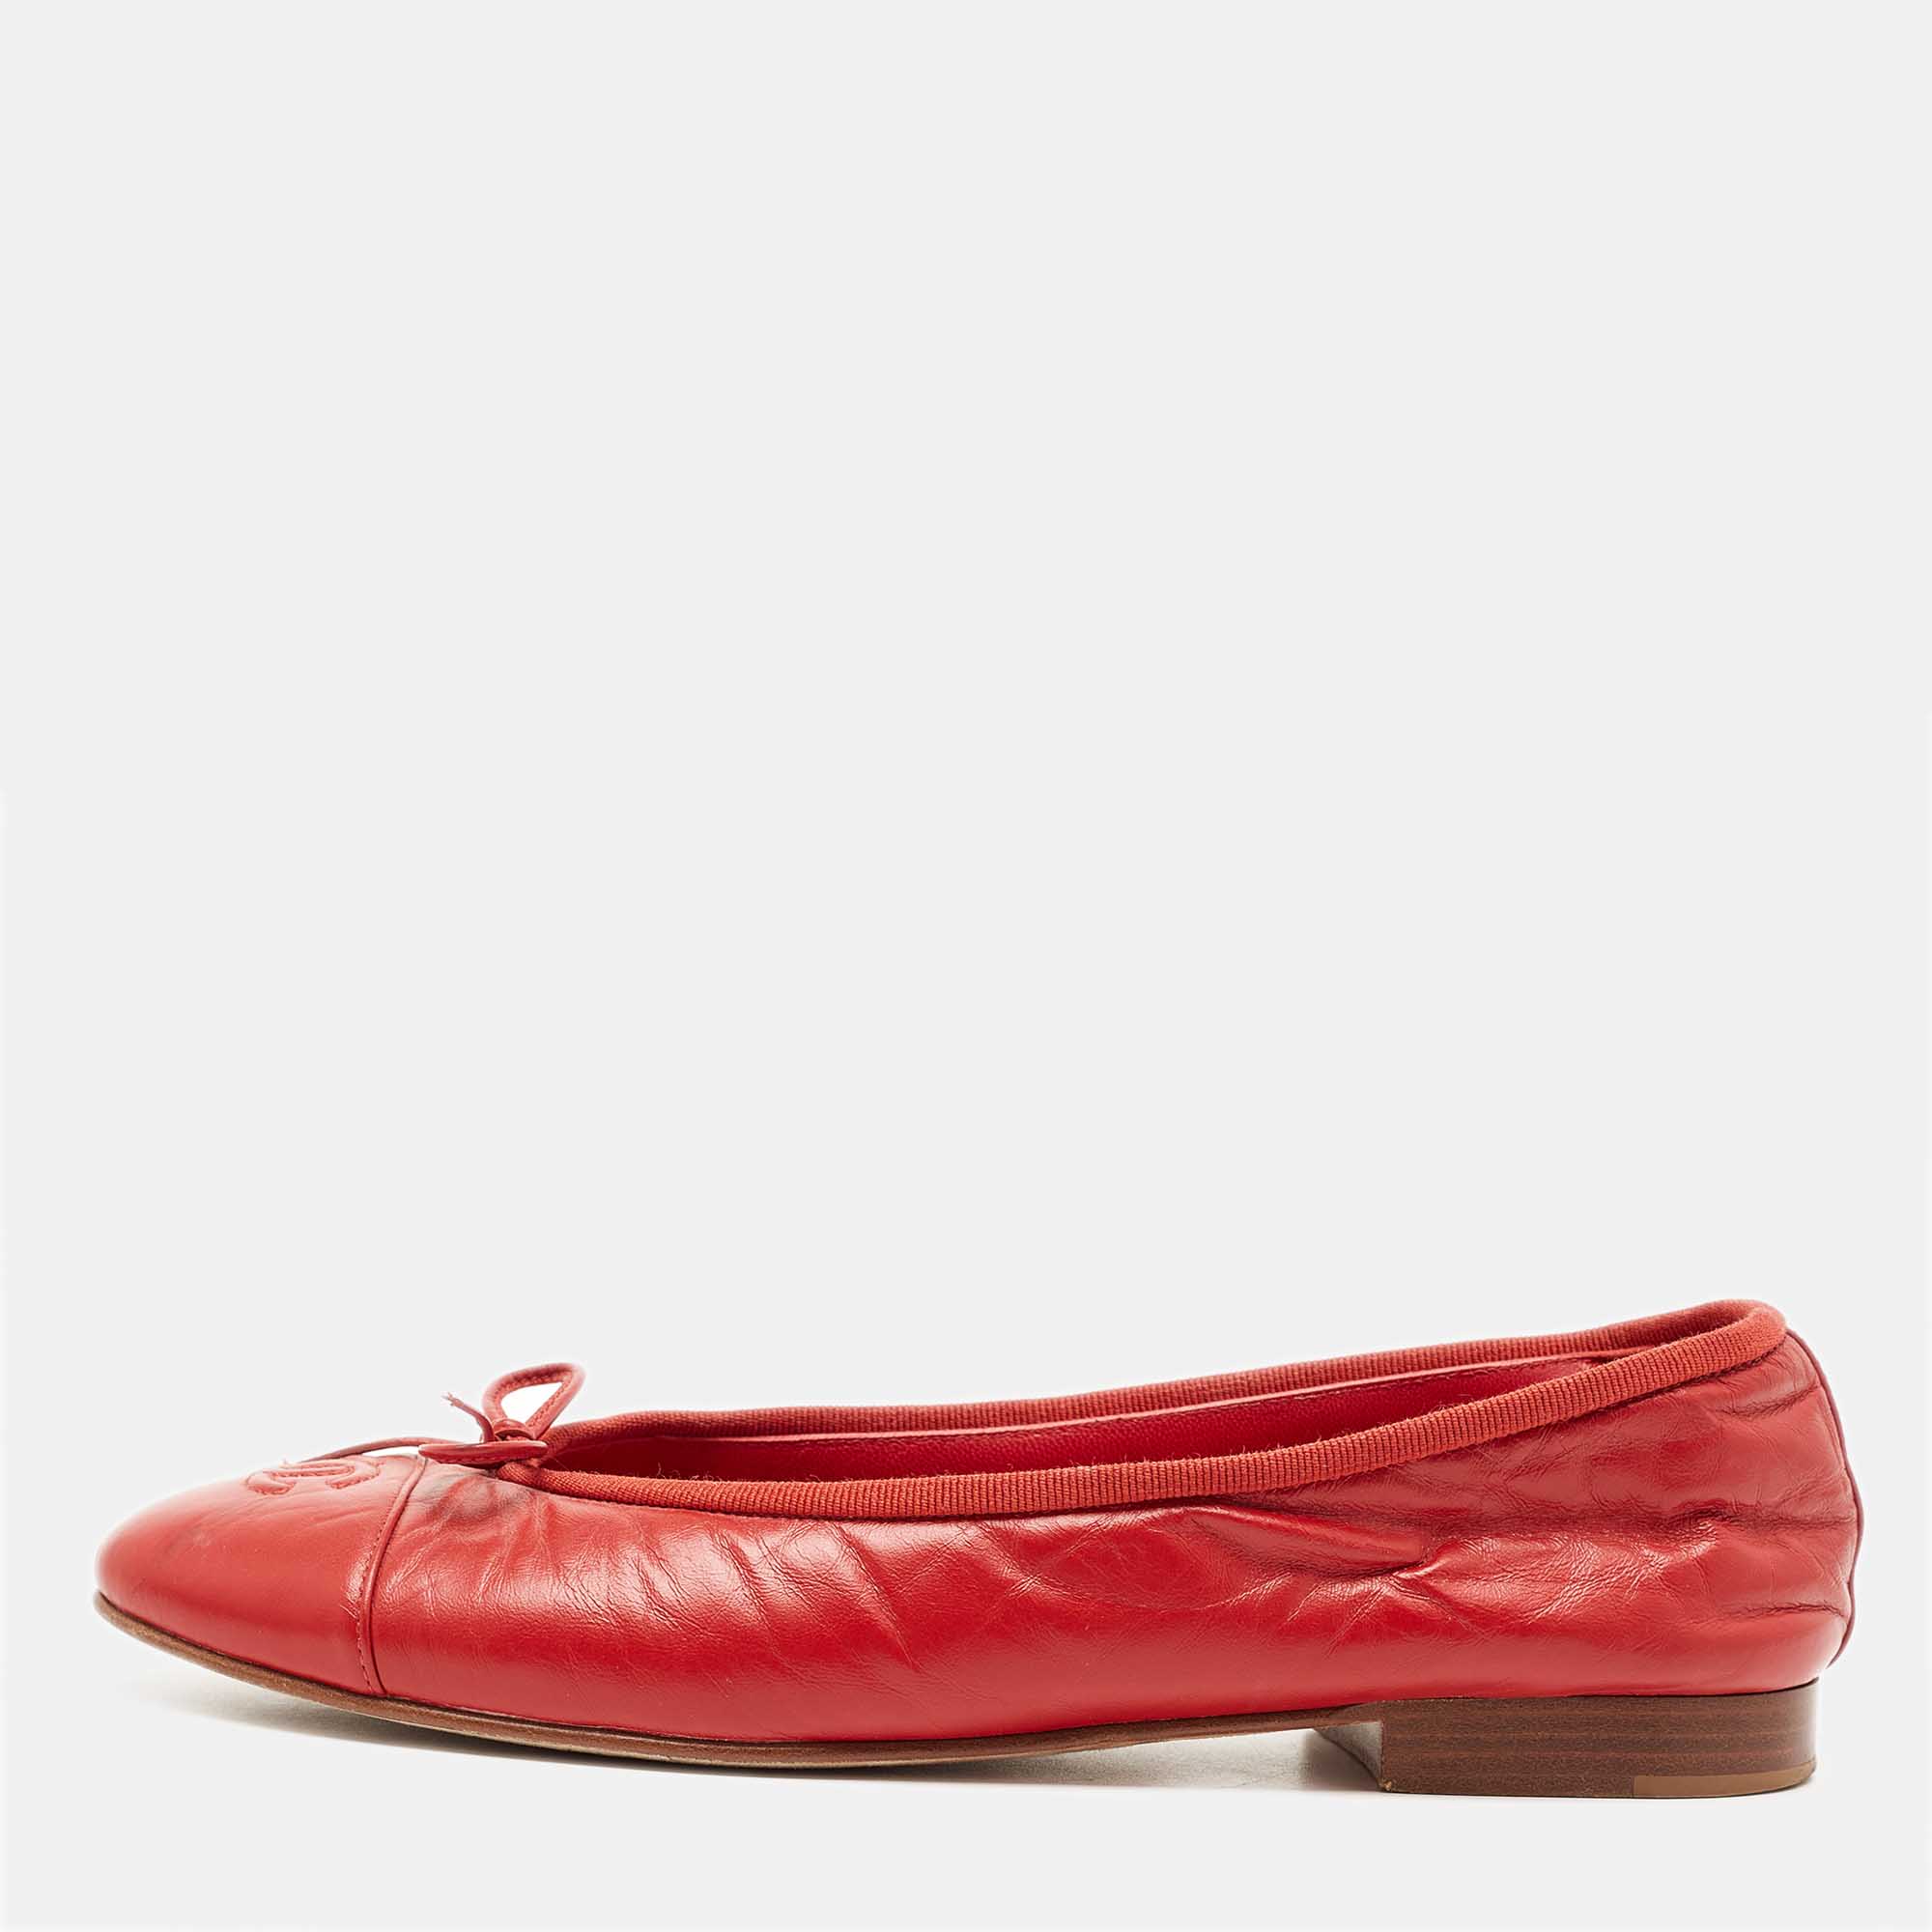 

Chanel Red Leather CC Bow Ballet Flats Size